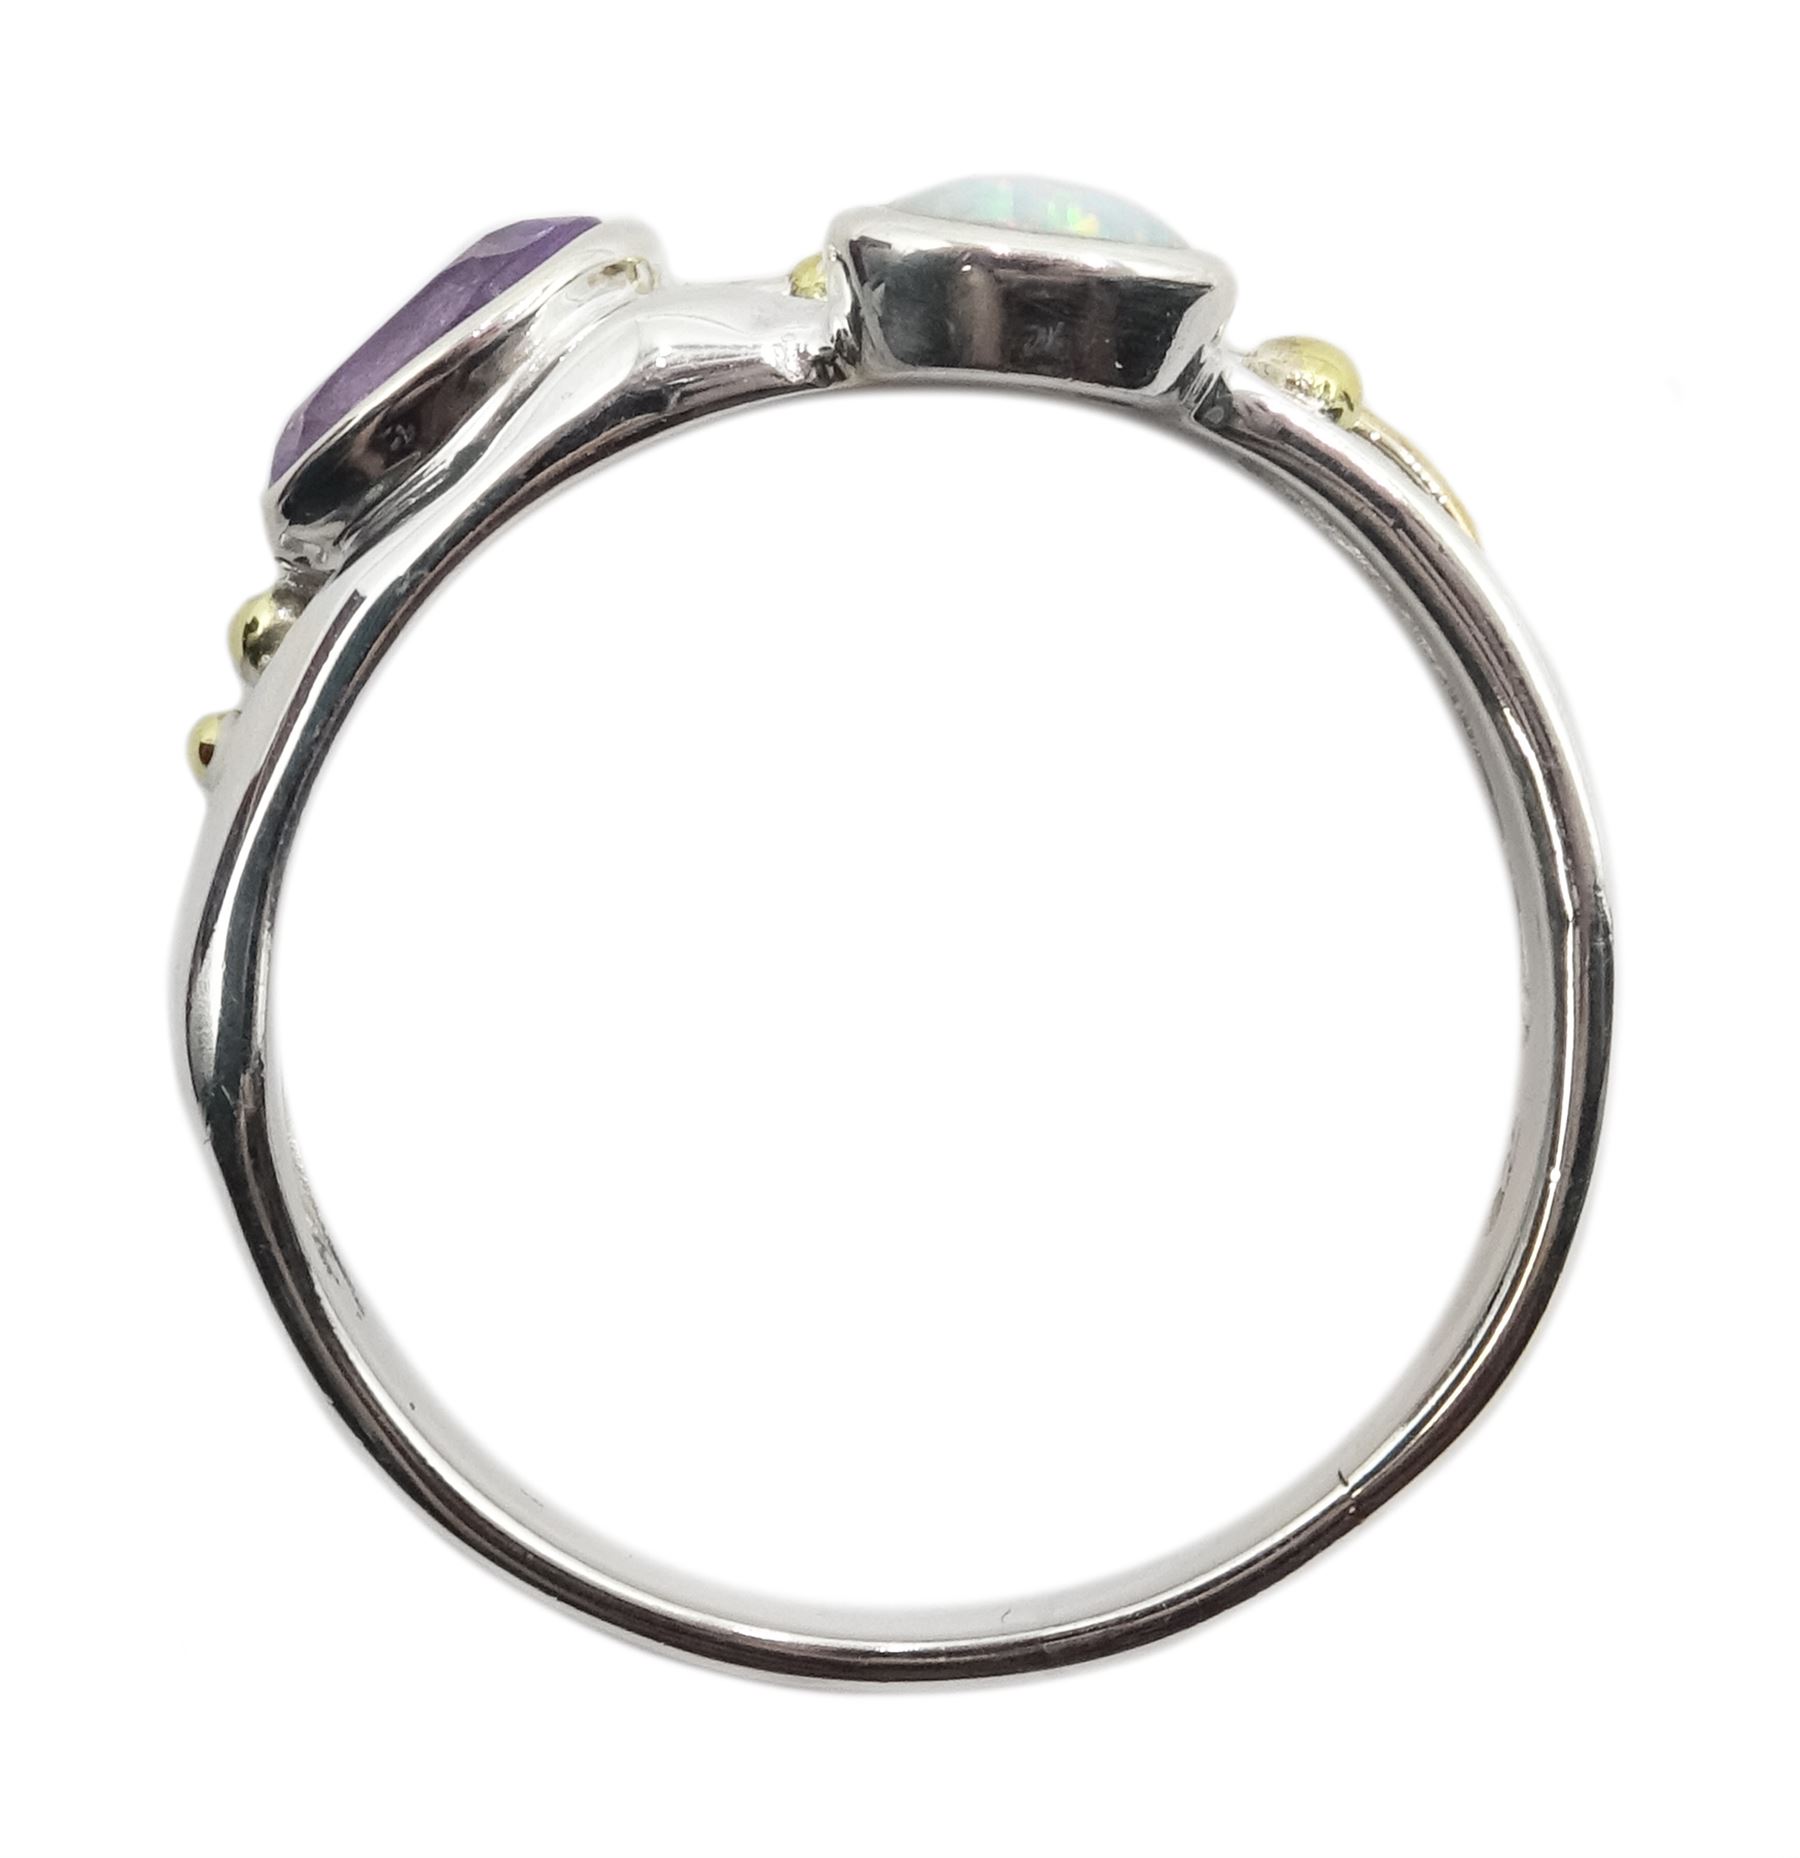 Silver and 14ct gold wire amethyst and opal ring - Image 7 of 7